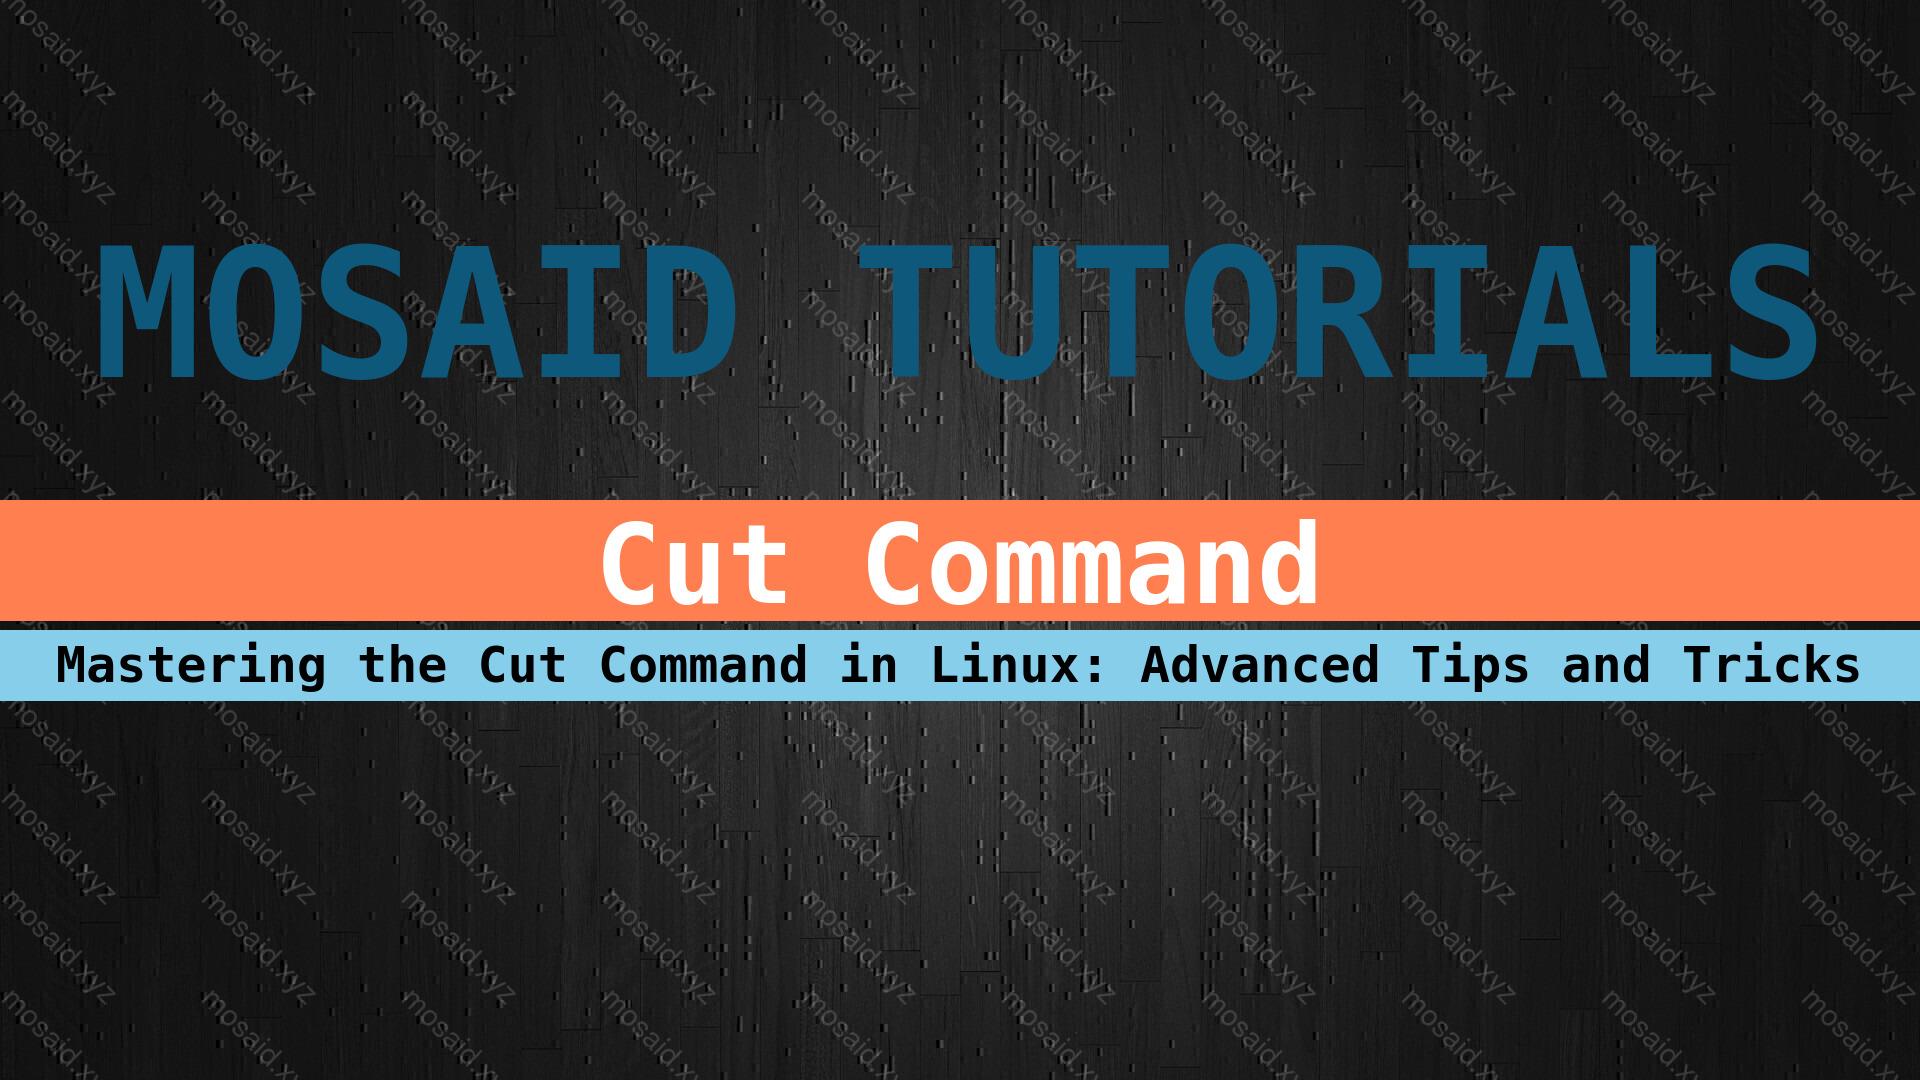 Banner of Expert Guide to Cut Command in Linux: Advanced Features Demystified